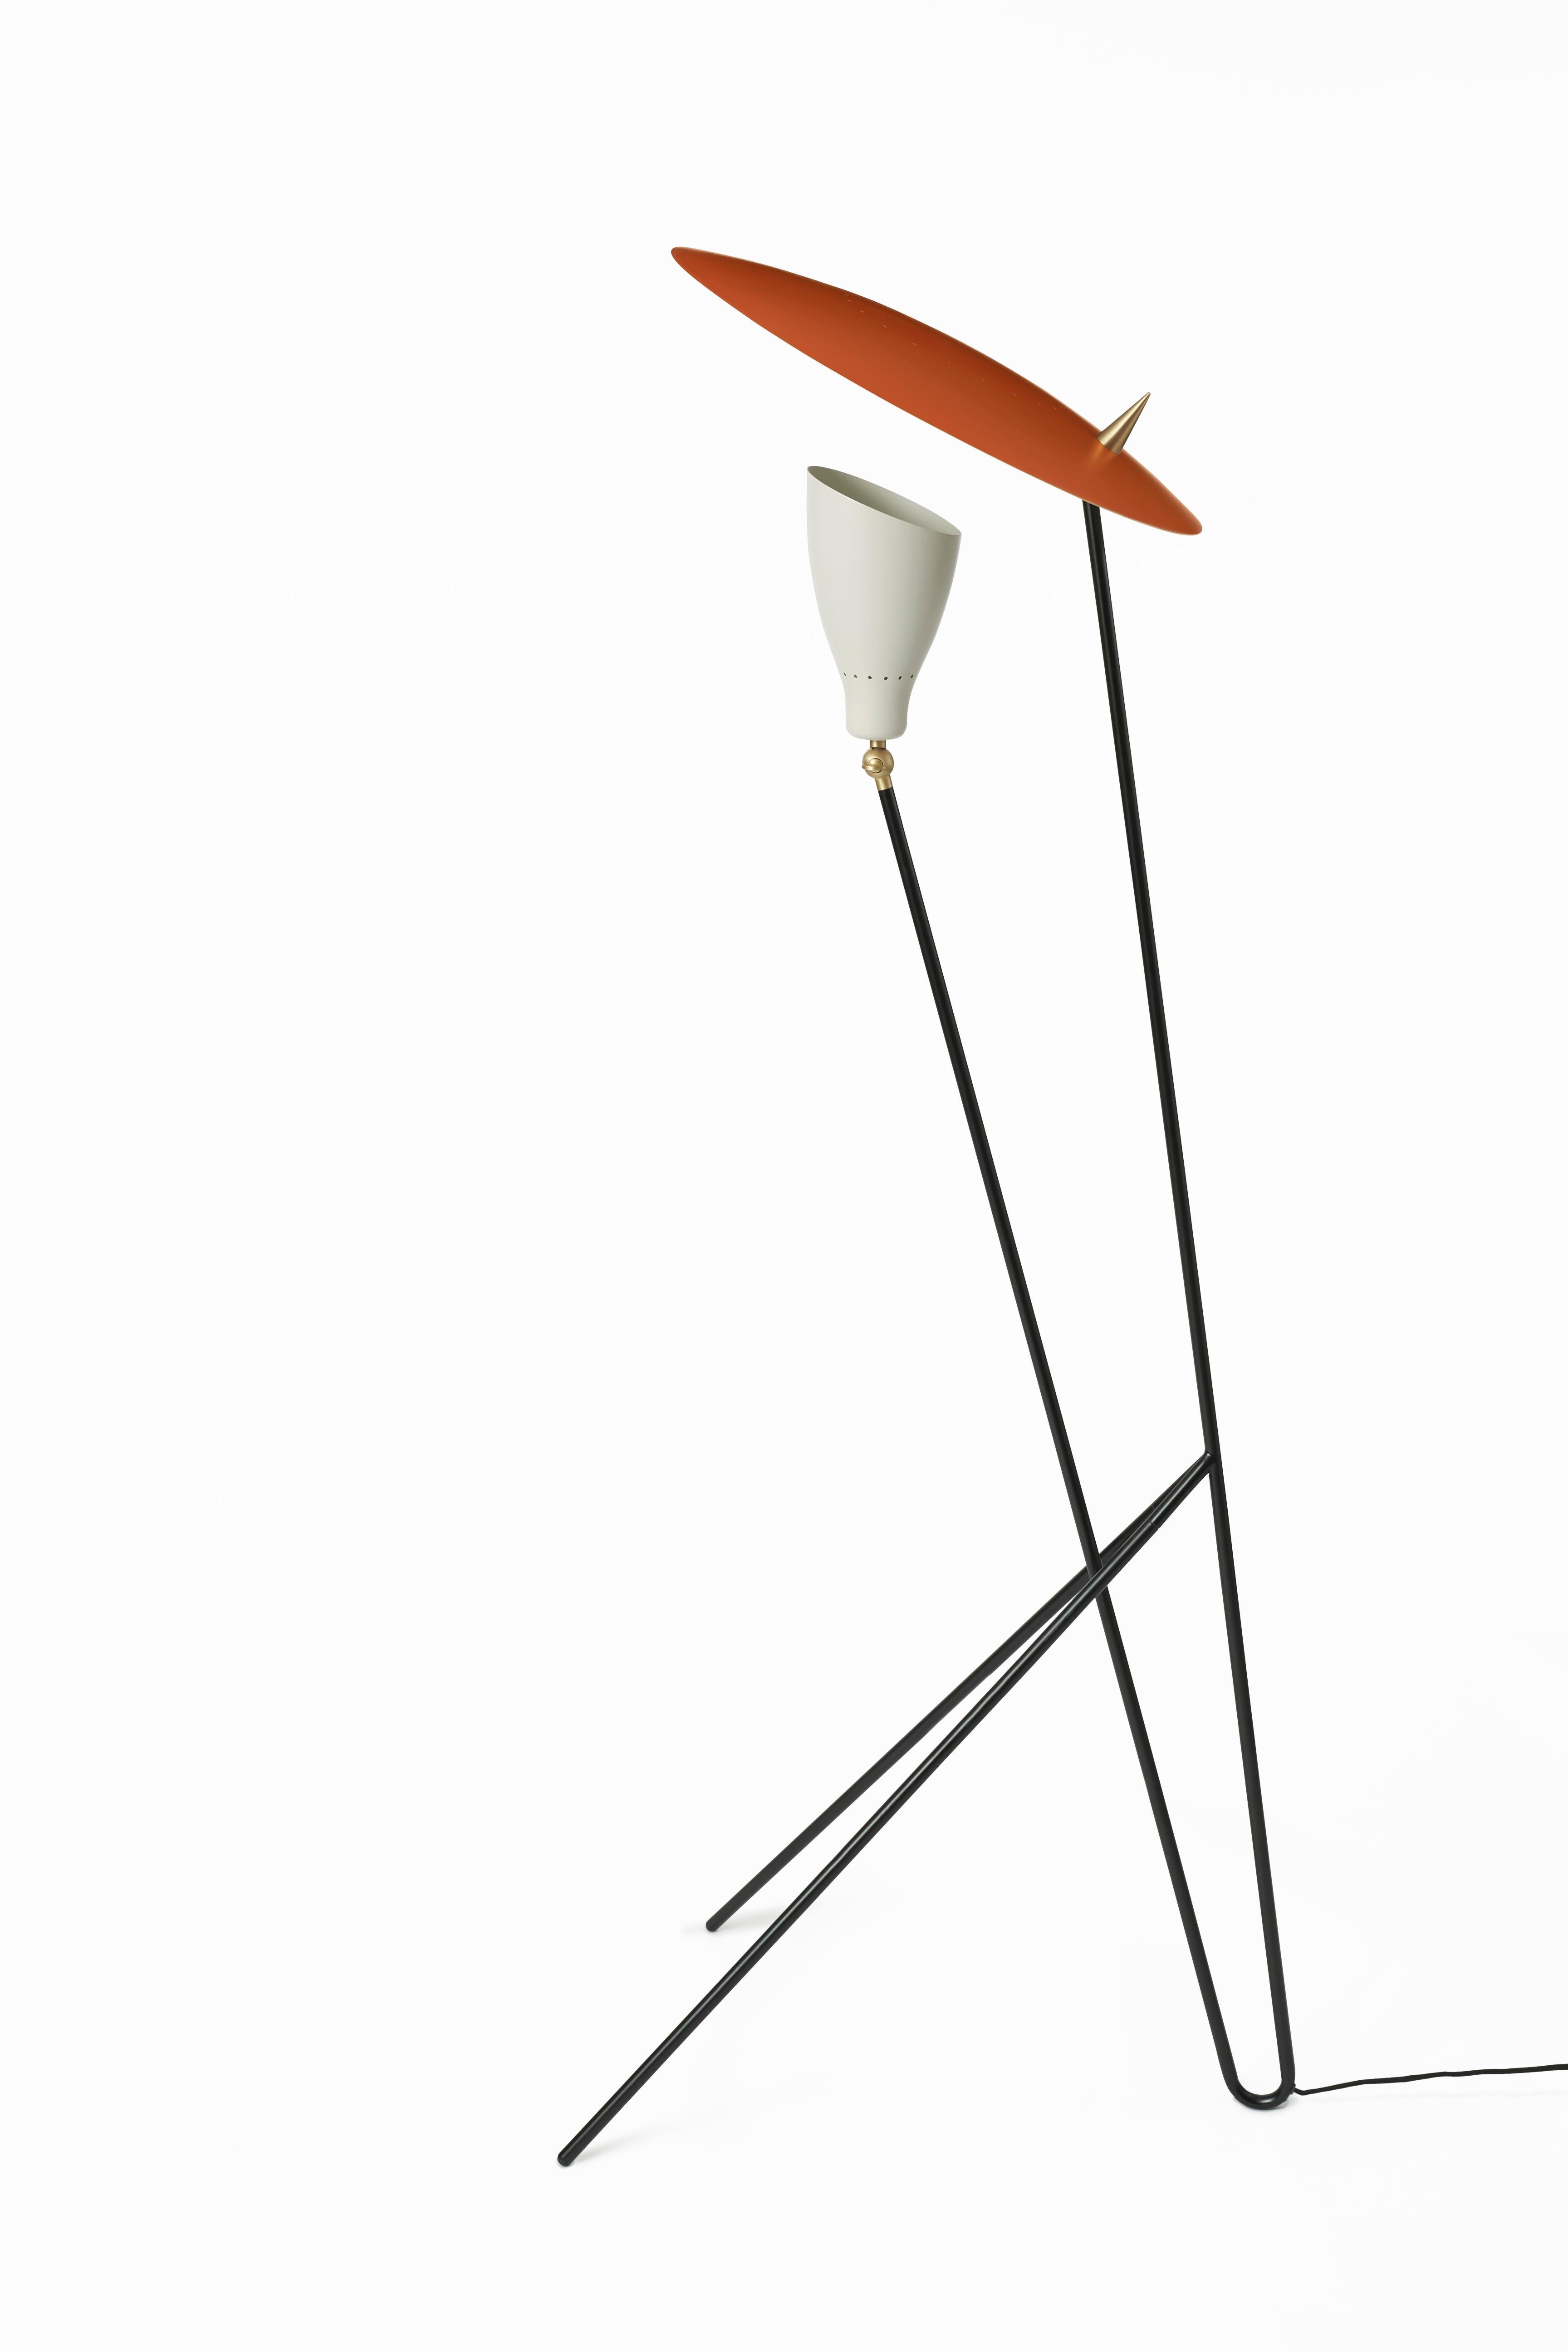 For Sale: Red (Rusty Red/Warm White) Silhouette Floor Lamp, by Svend Aage Holm-Sørensen from Warm Nordic